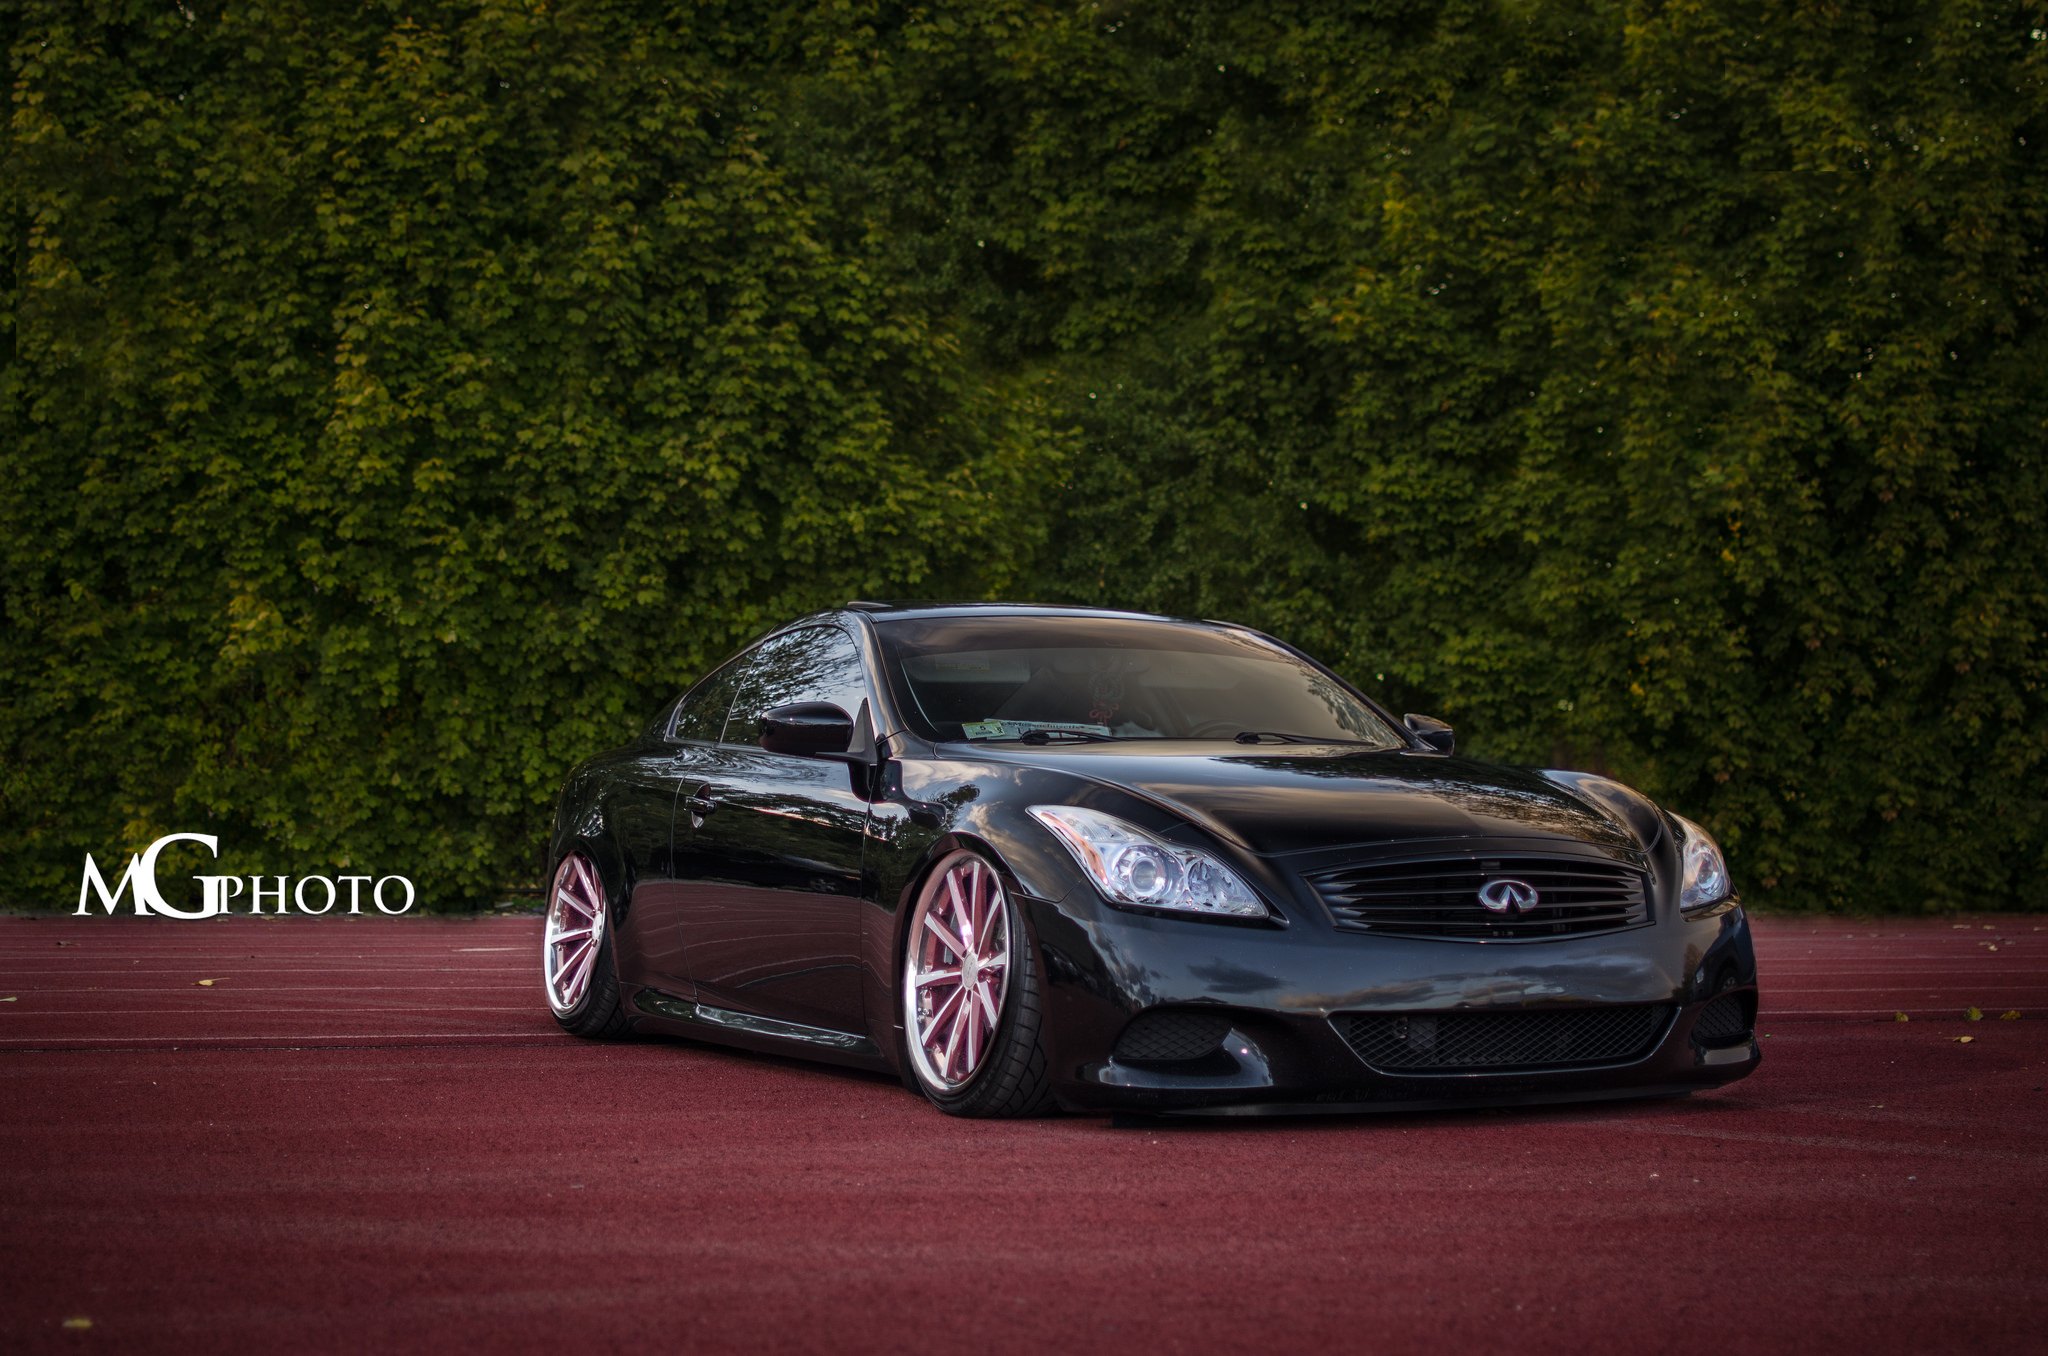 Blacked Out Billet Grille on Infiniti G37 - Photo by Matthew Gaumont